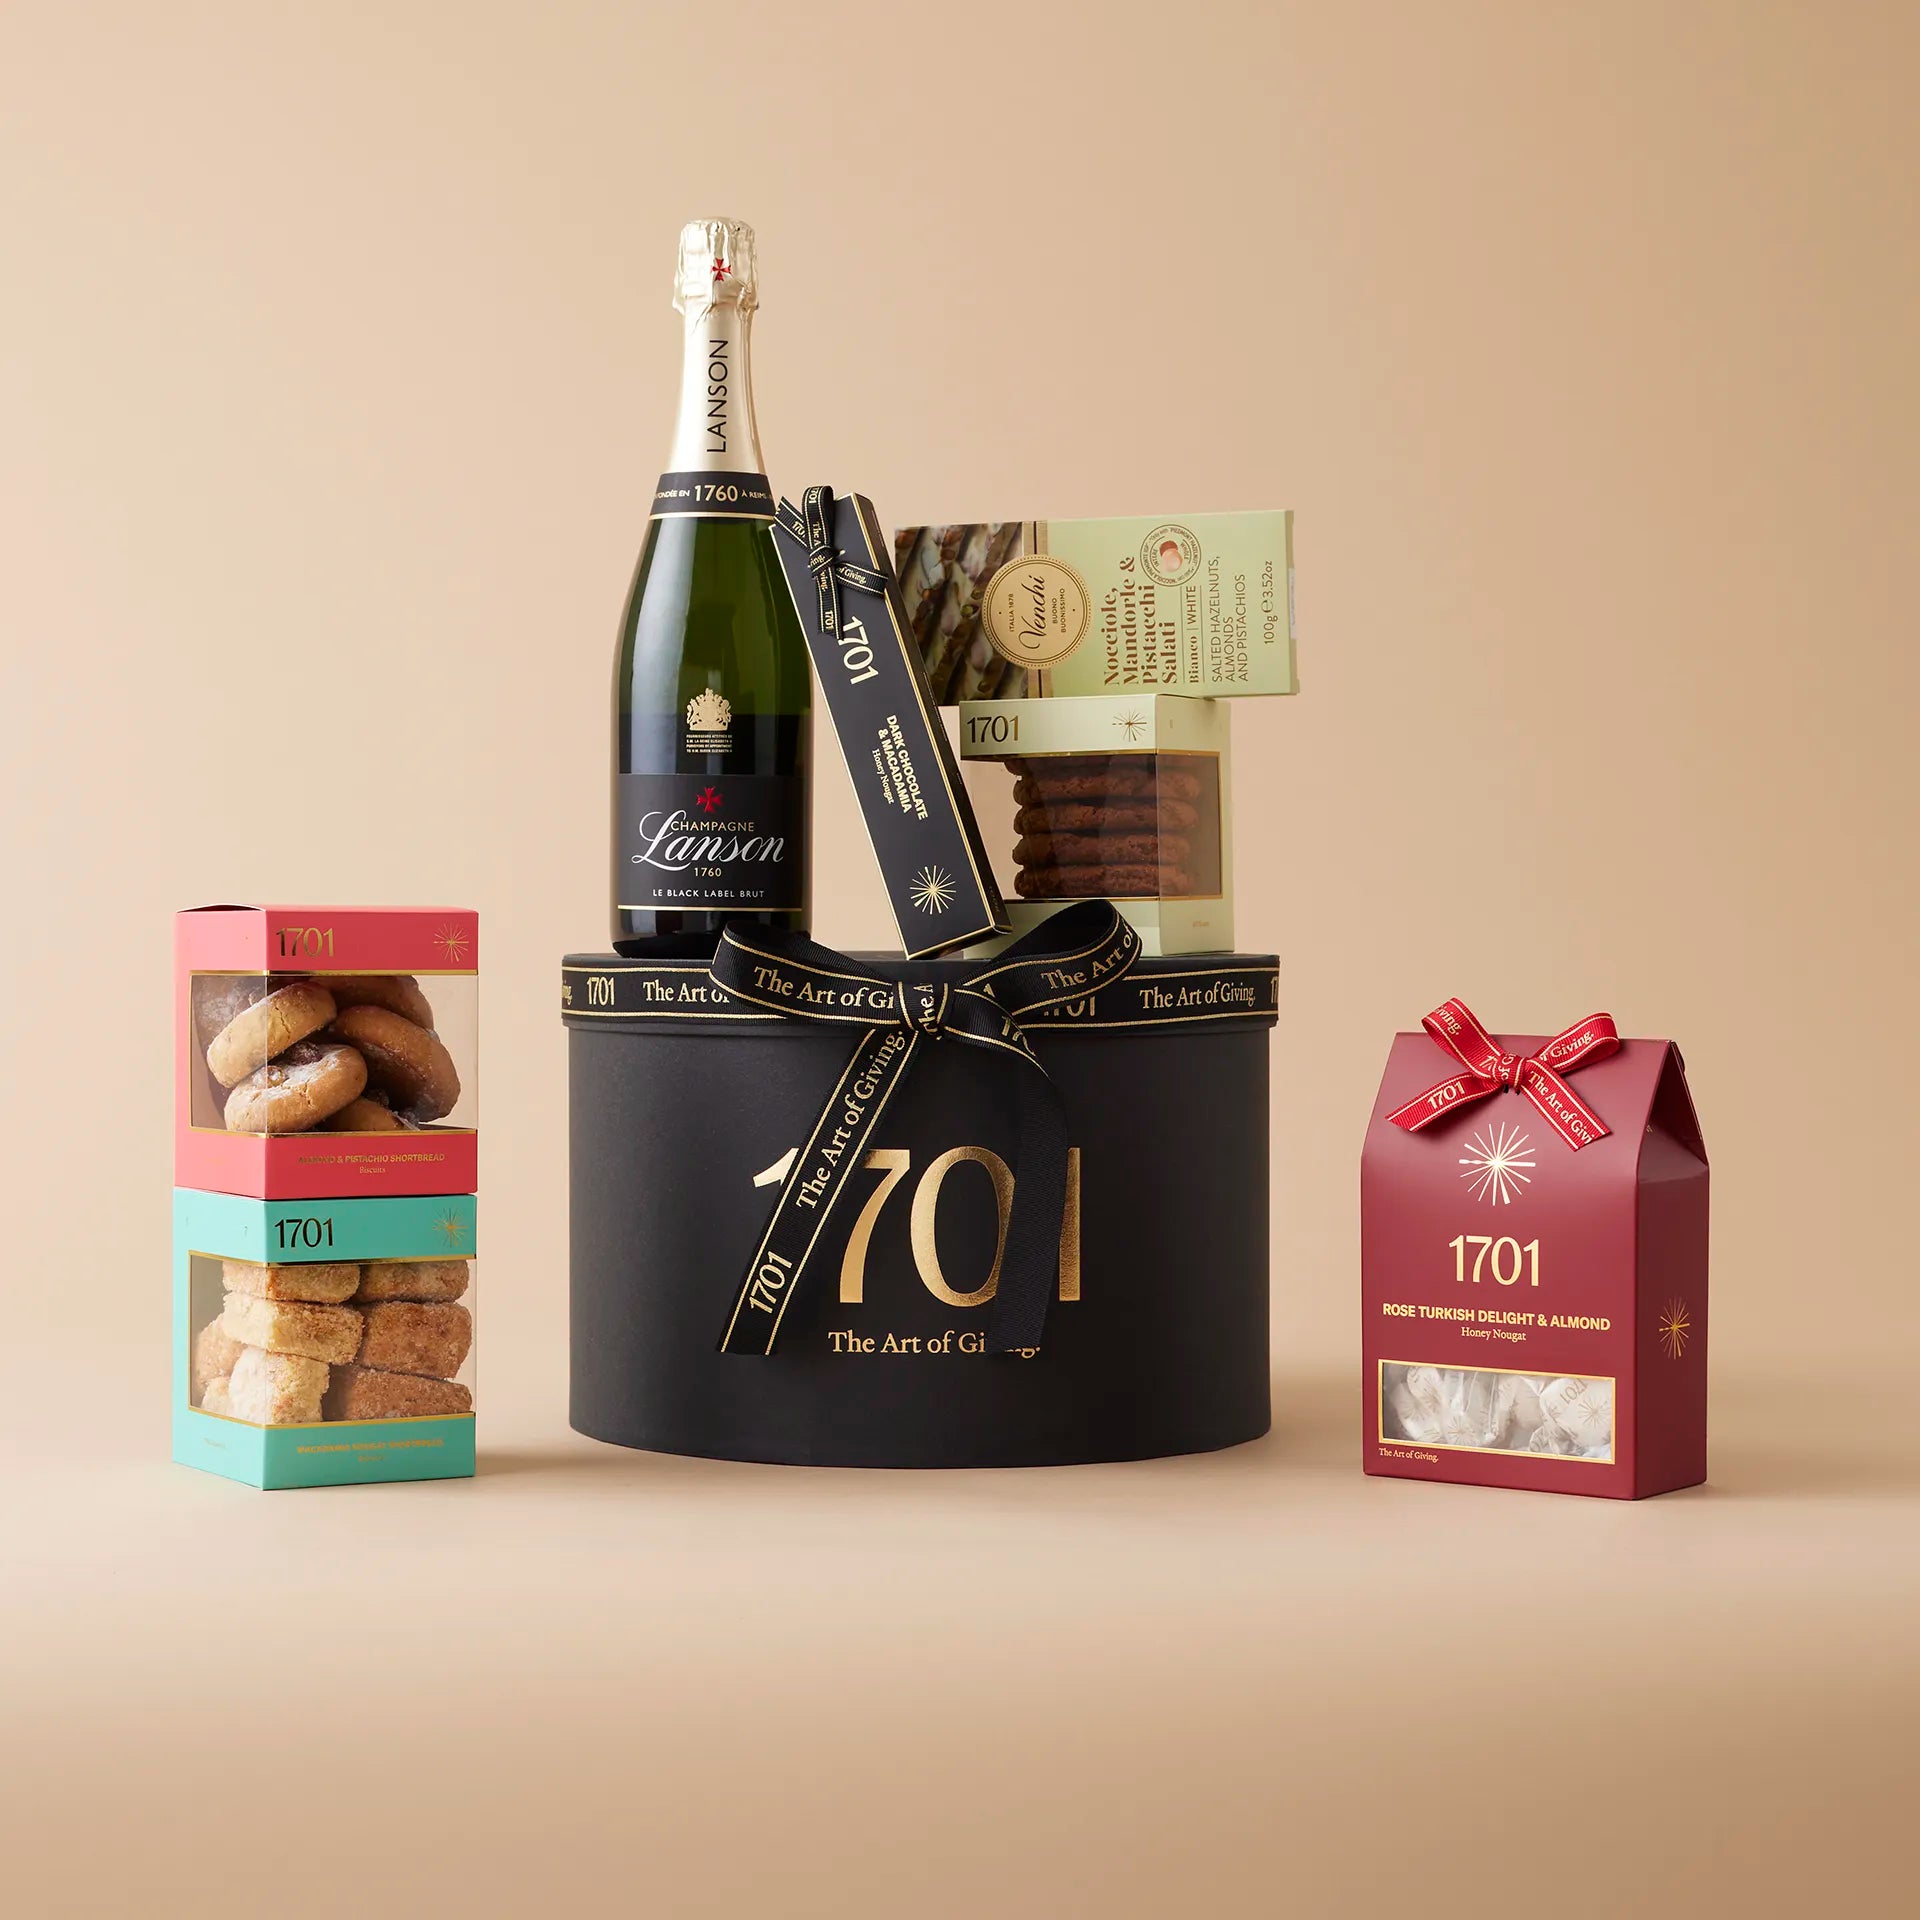 A gift box featuring a bottle of Lanson Black NV Brut and a selection of sweets. The box includes a box of handcrafted honey nougat, a nougat bar, a hand-picked selection of biscuits, and an imported Italian chocolate. The product is presented on a signature hat box.